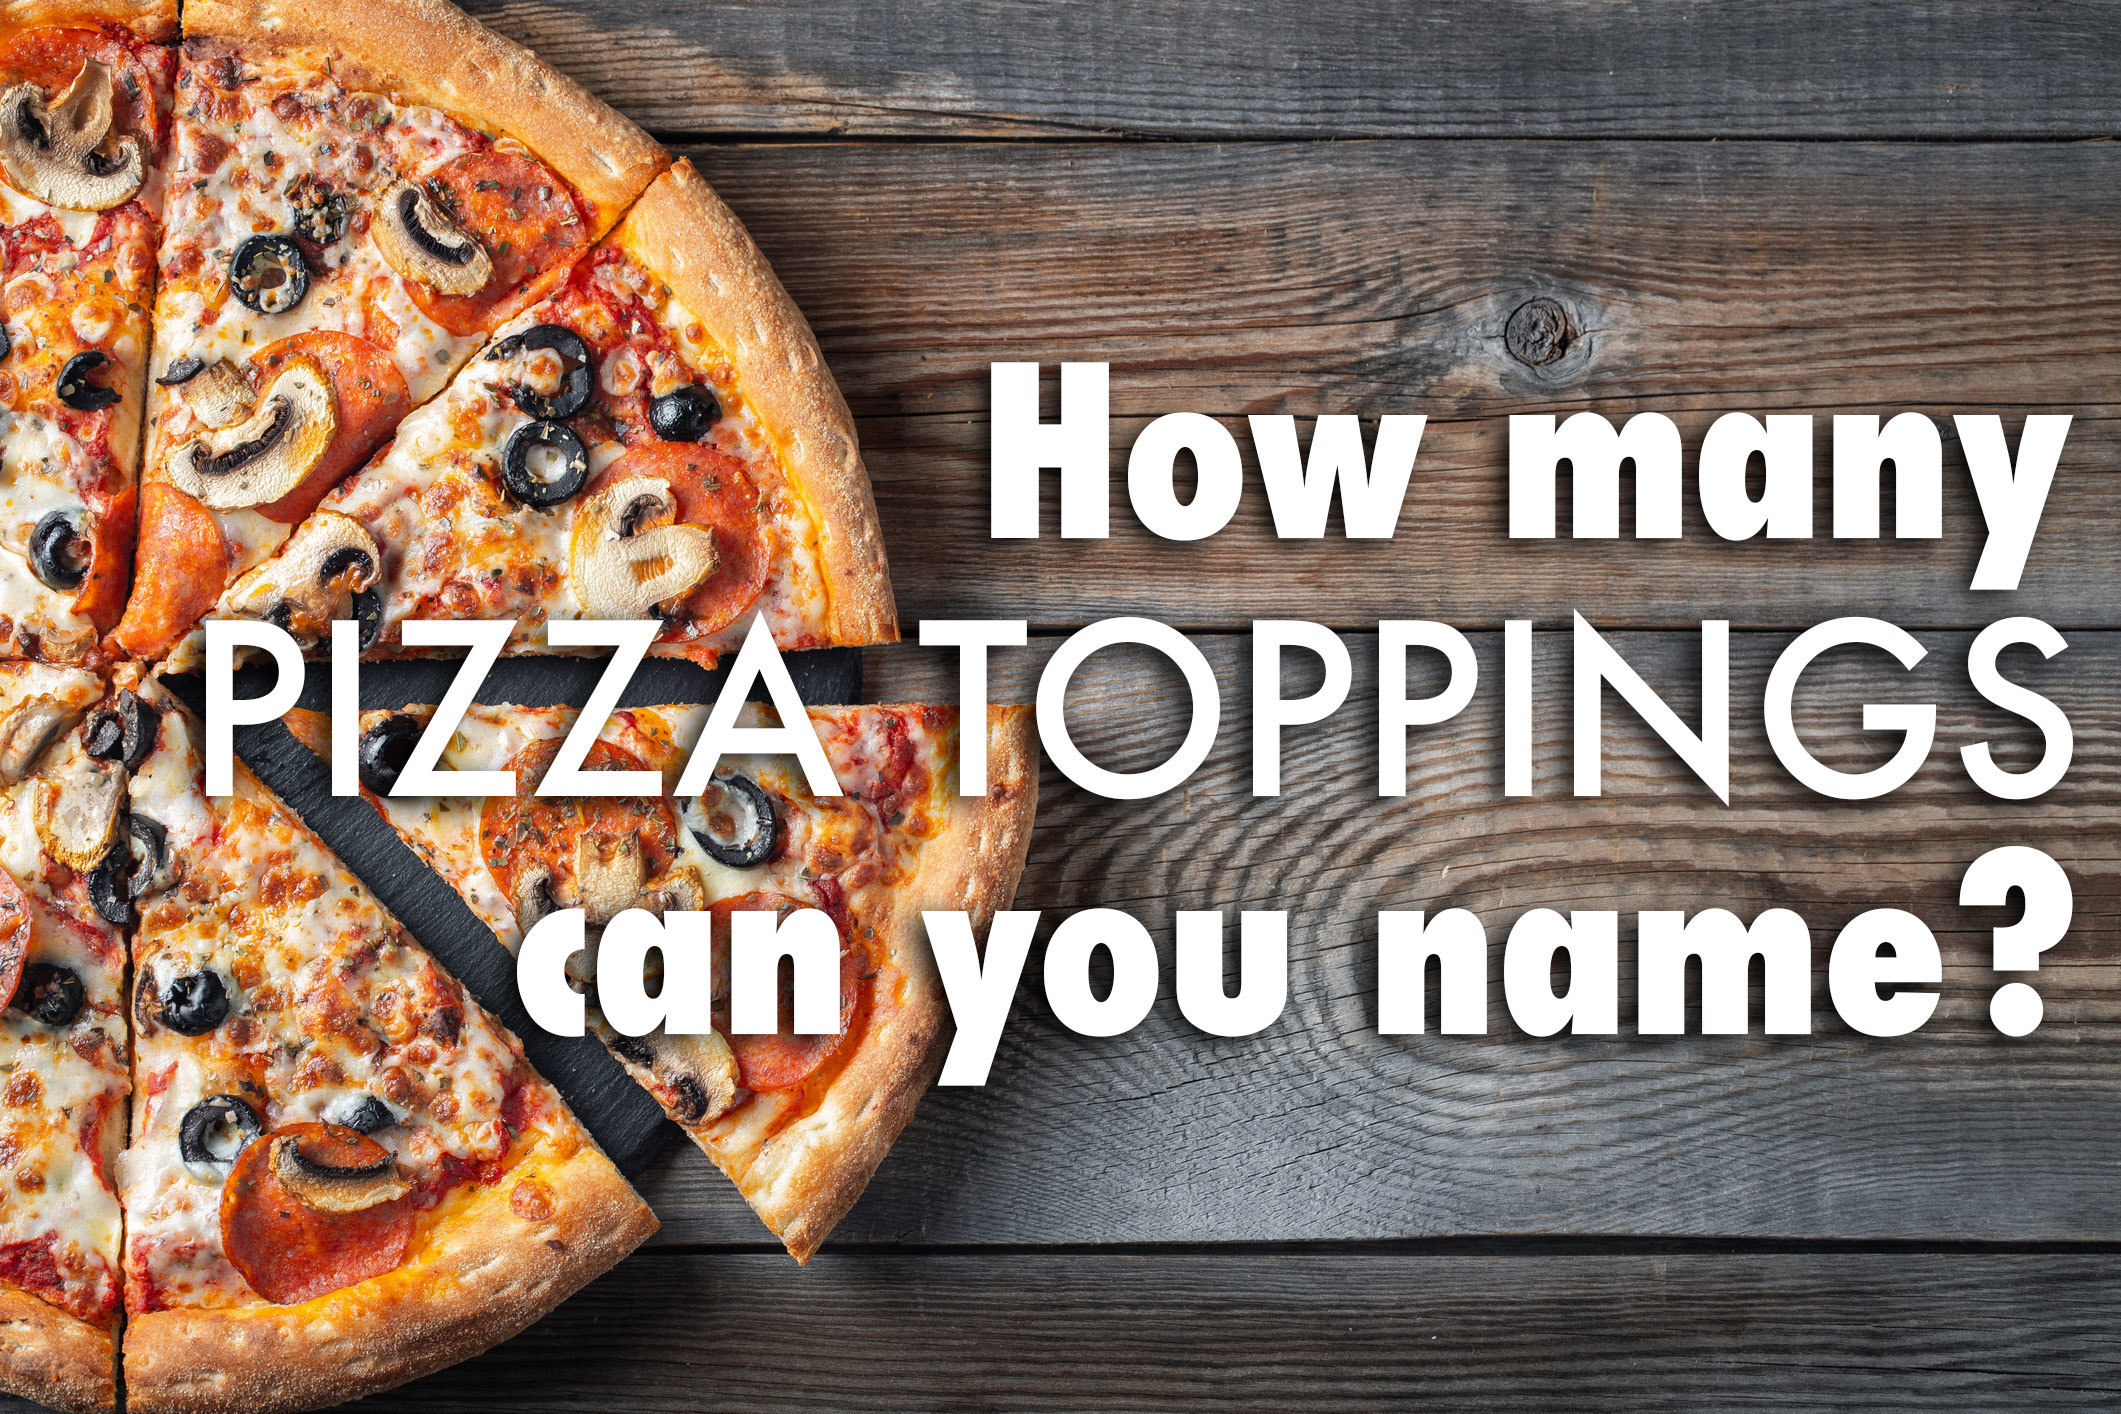 Pizza toppings name